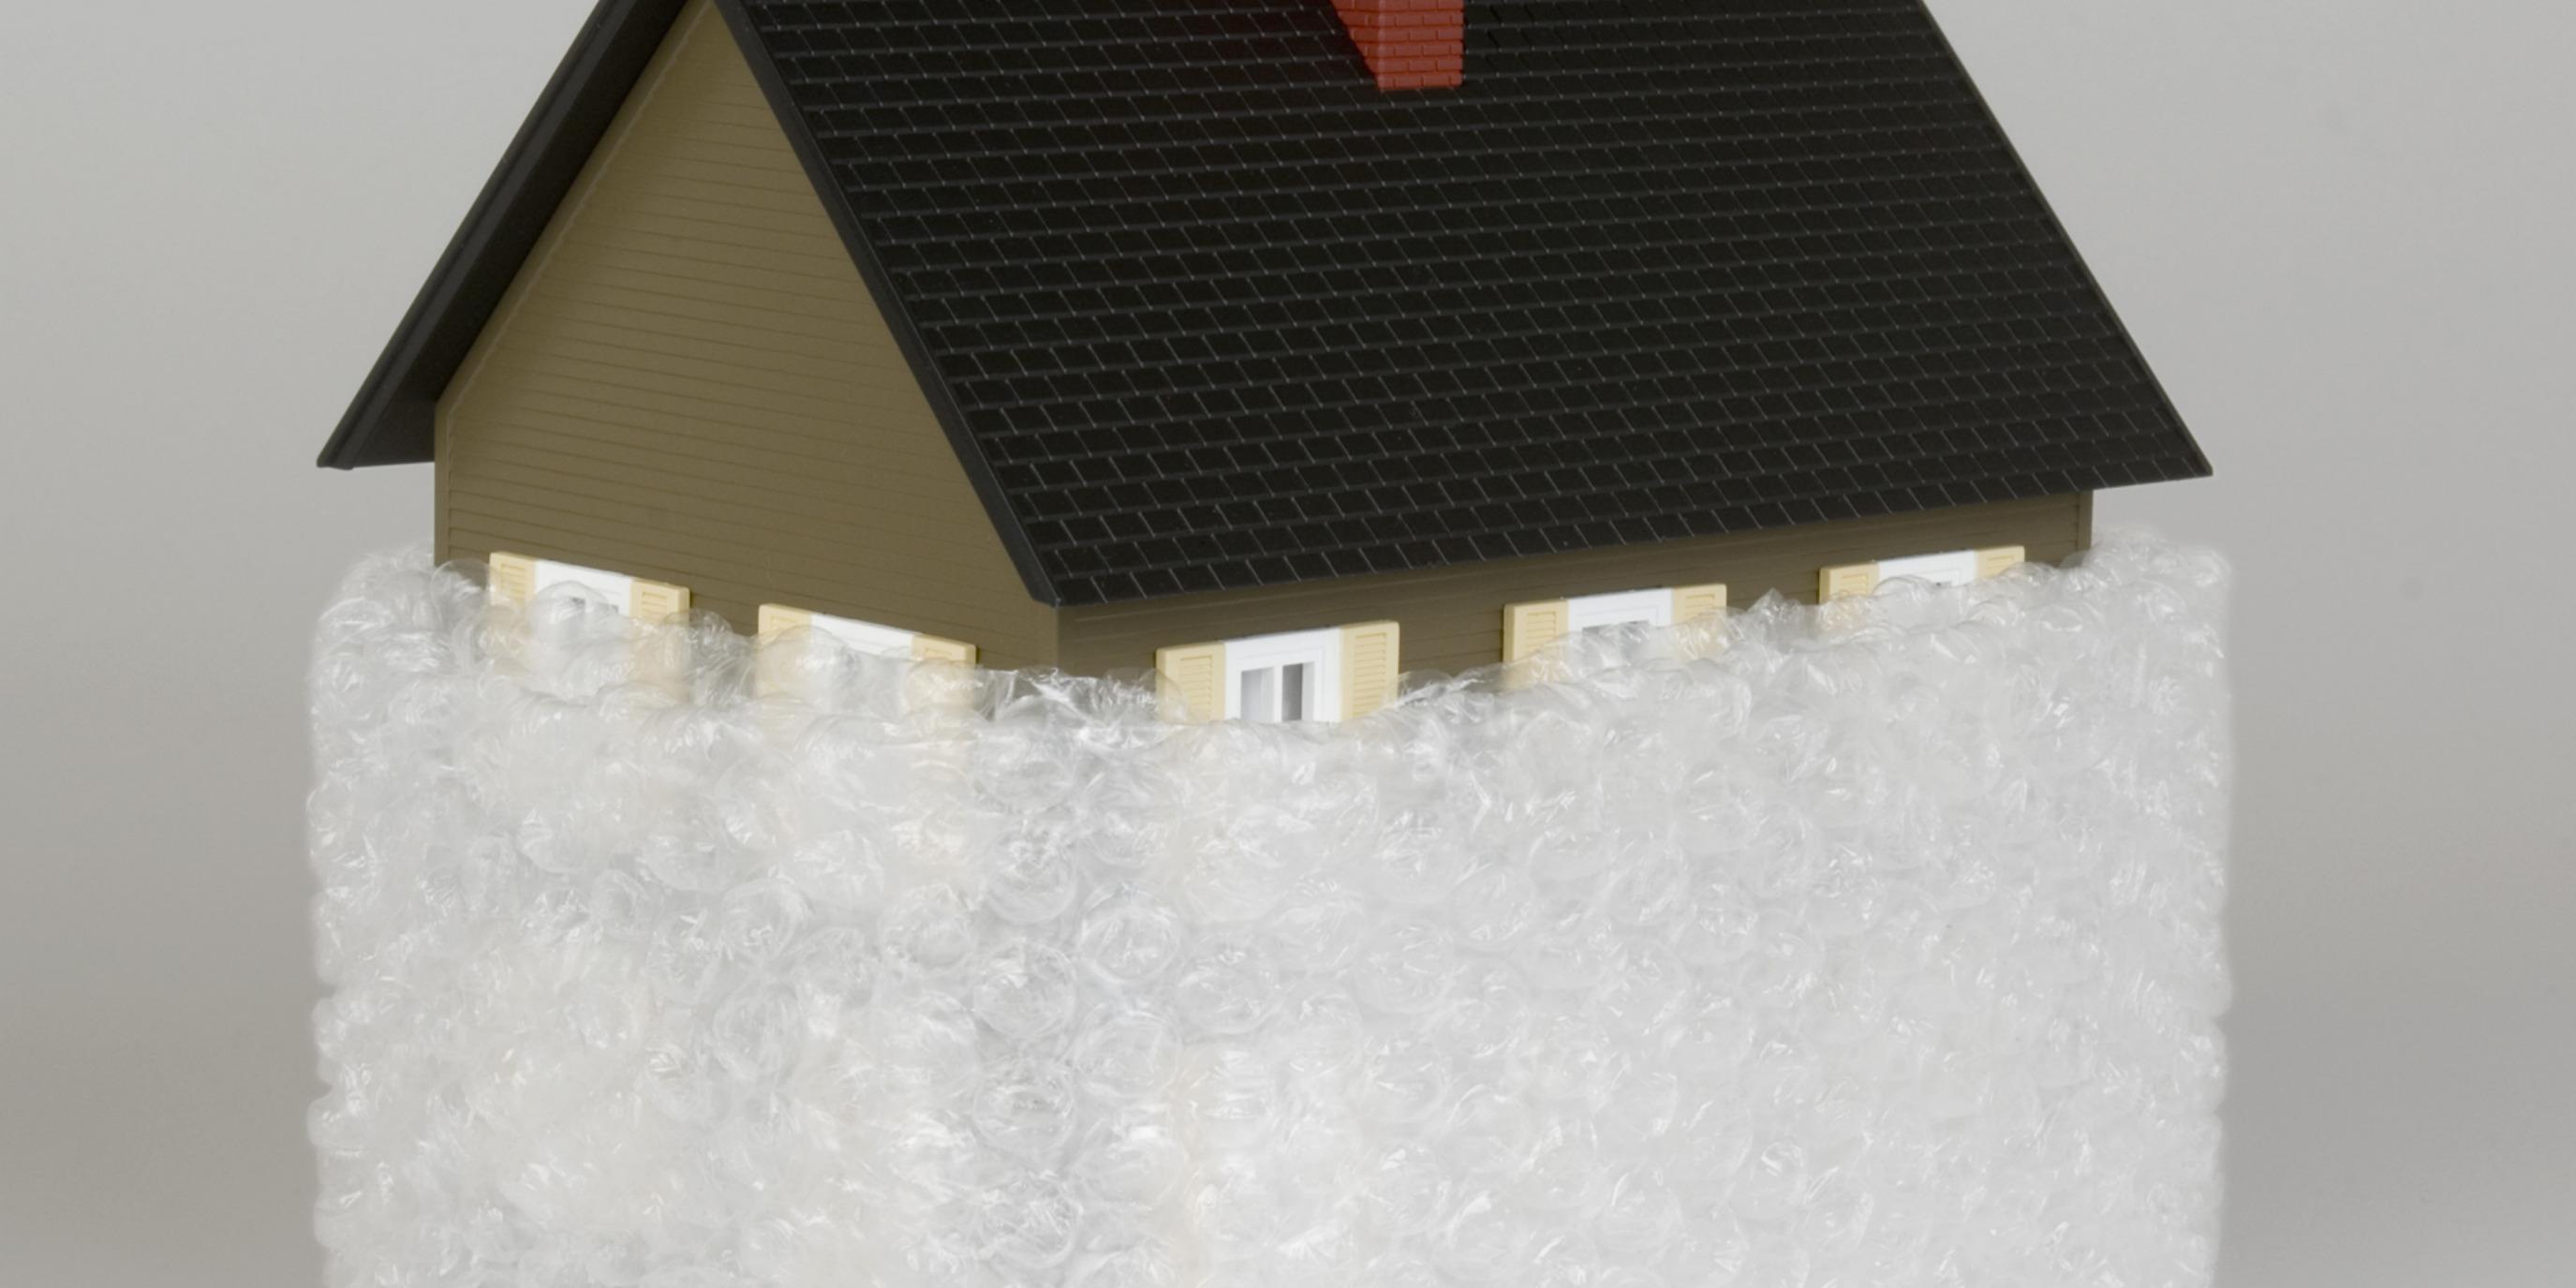 Insulate Your Windows with Bubble Wrap and Water